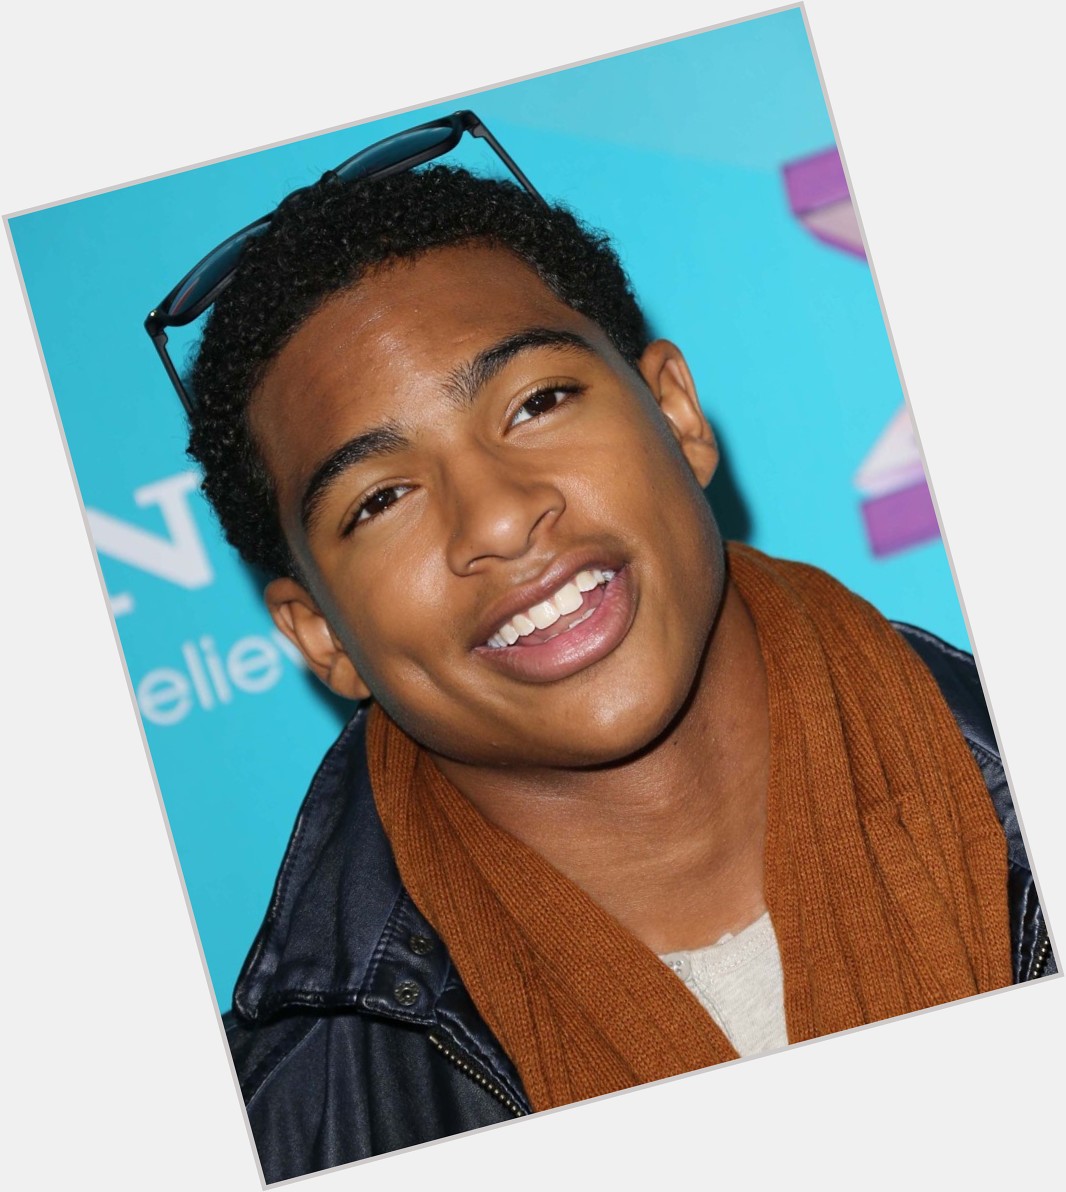 <a href="/hot-men/arin-ray/where-dating-news-photos">Arin Ray</a> Athletic body,  black hair & hairstyles